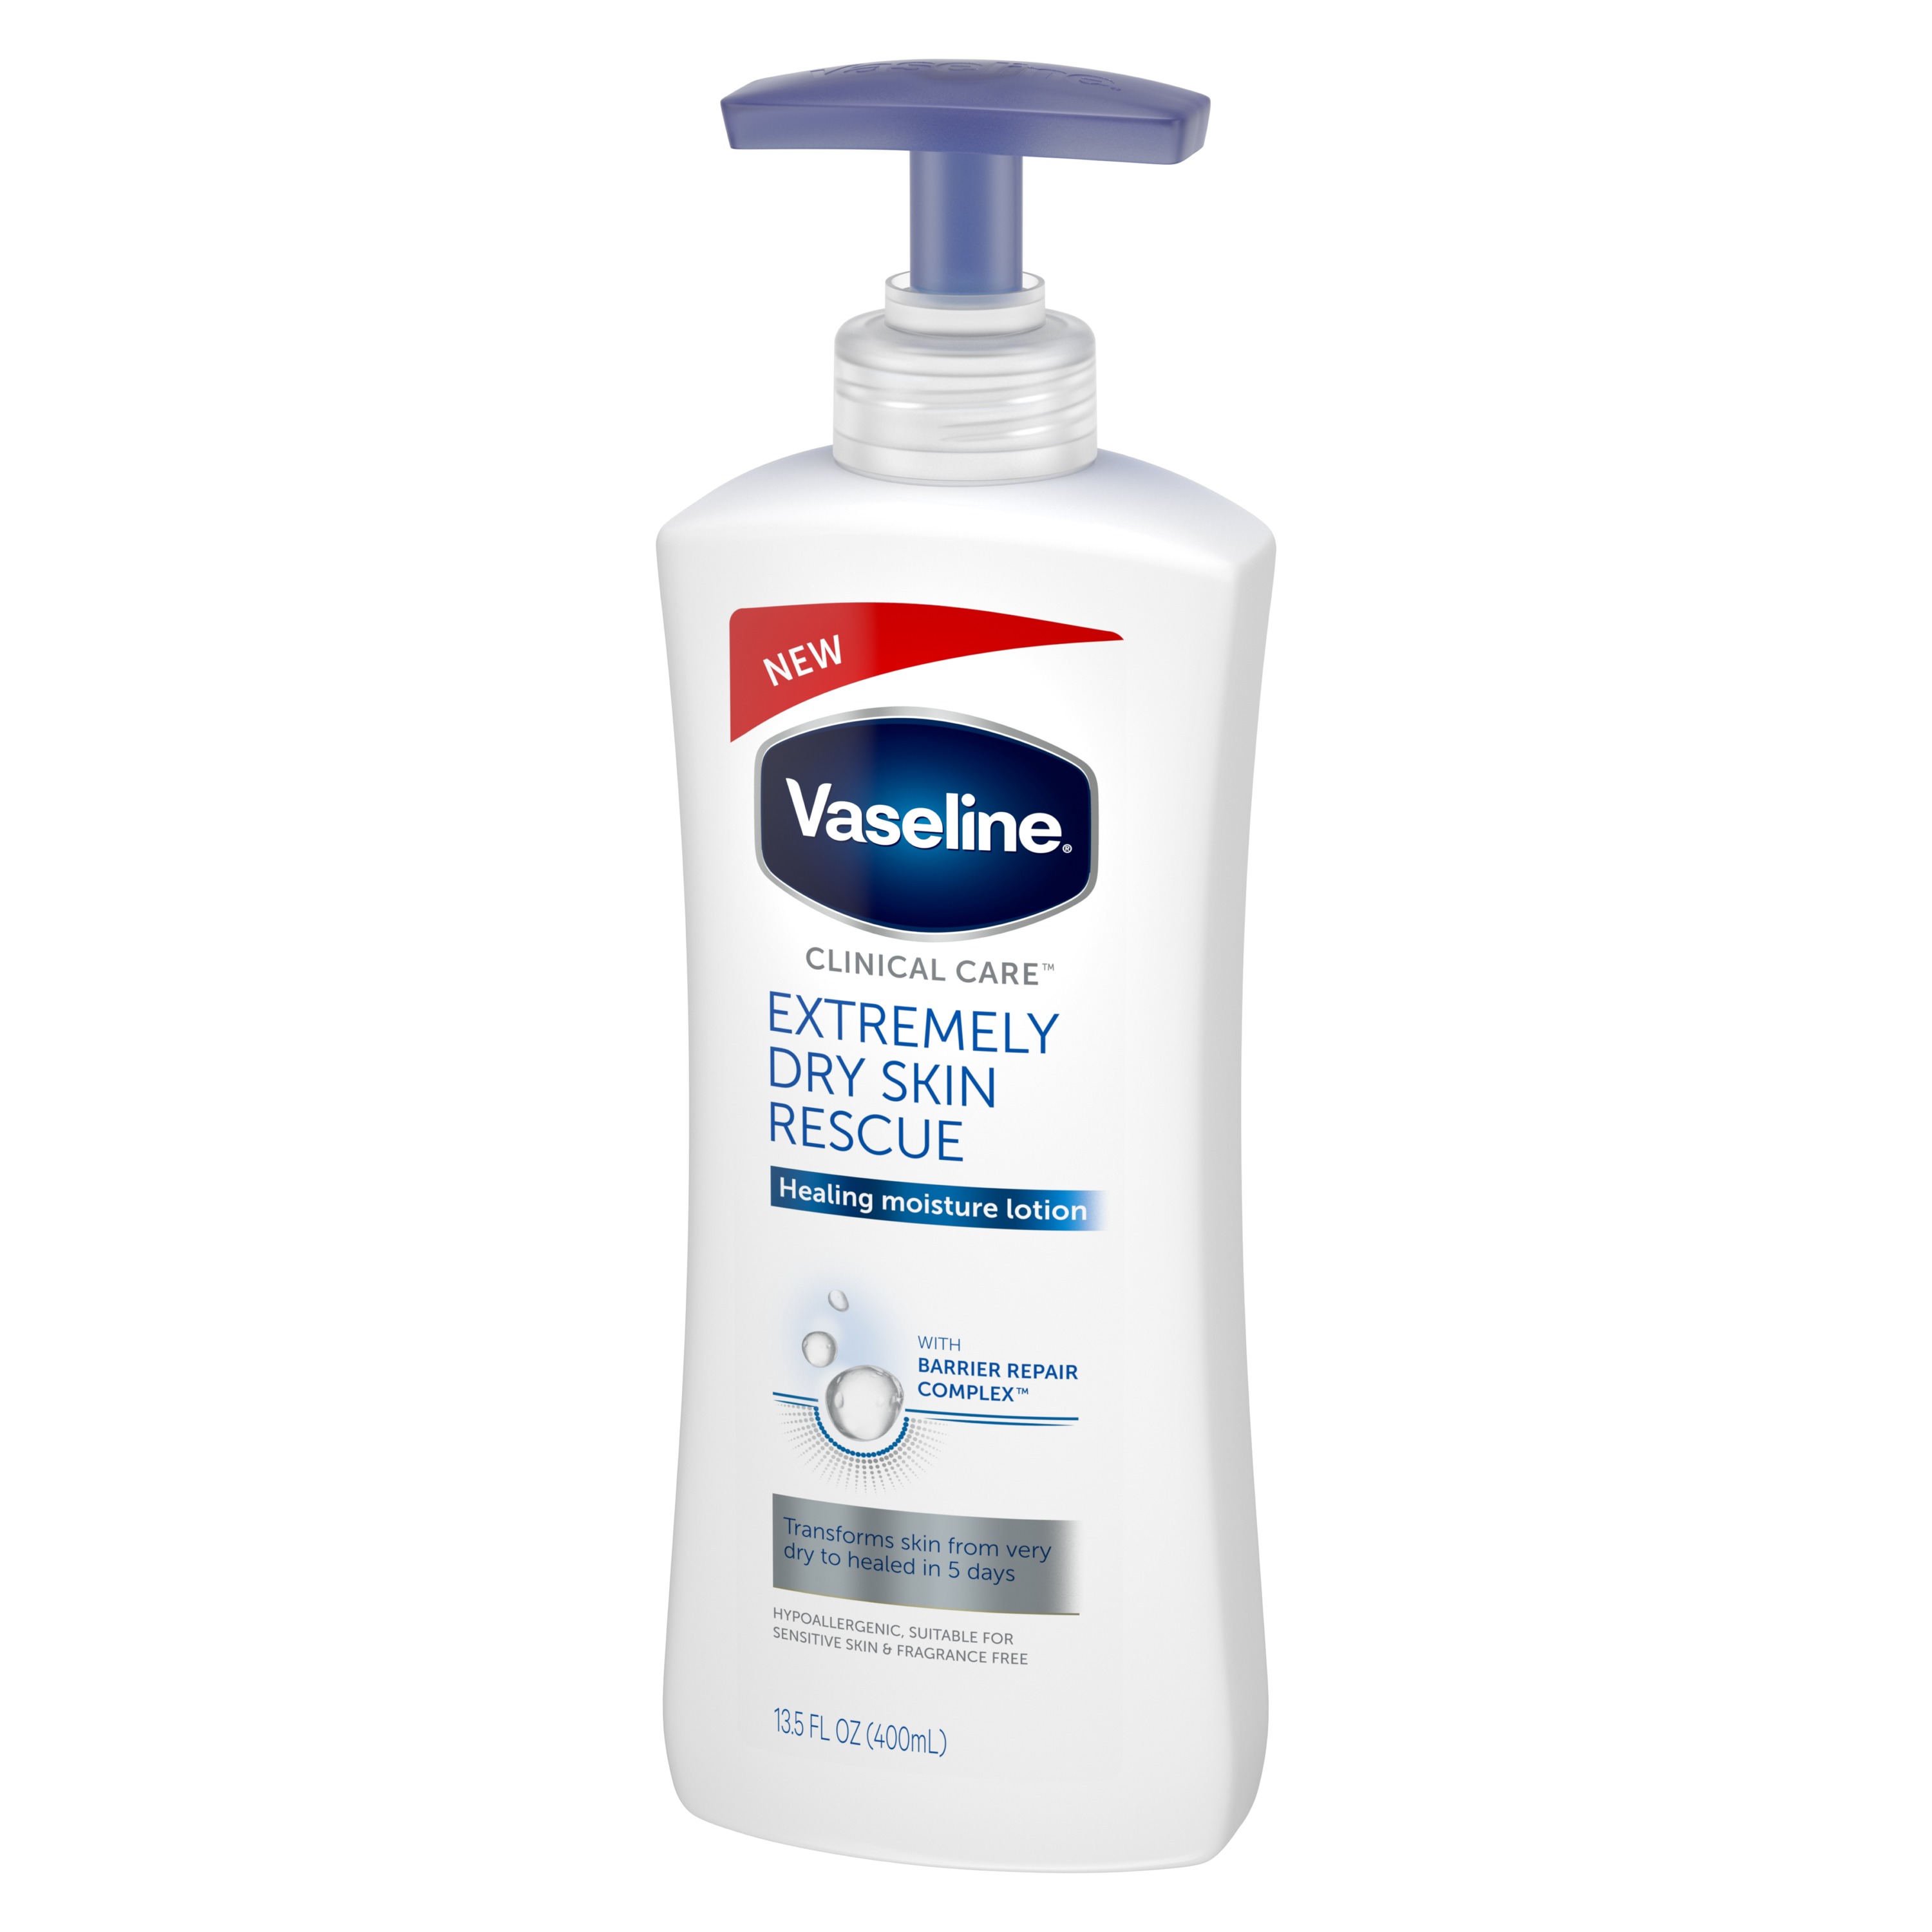 Vaseline Clinical Care hand and body lotion Extremely Dry Skin Rescue 13.5 oz - image 4 of 12